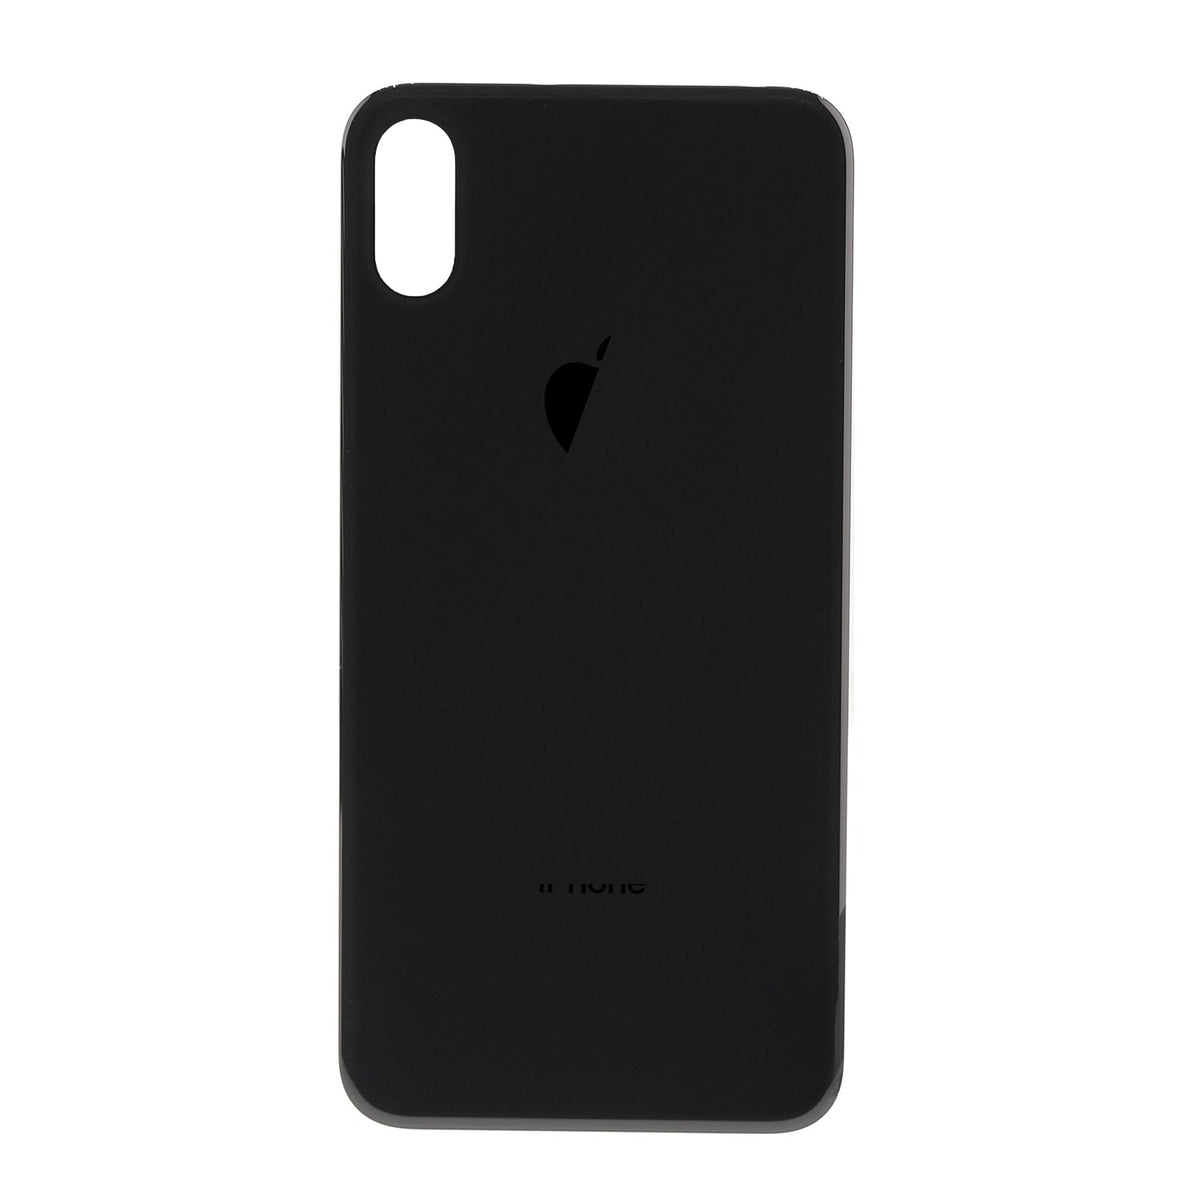 SPACE GRAY BACK COVER  FOR IPHONE X